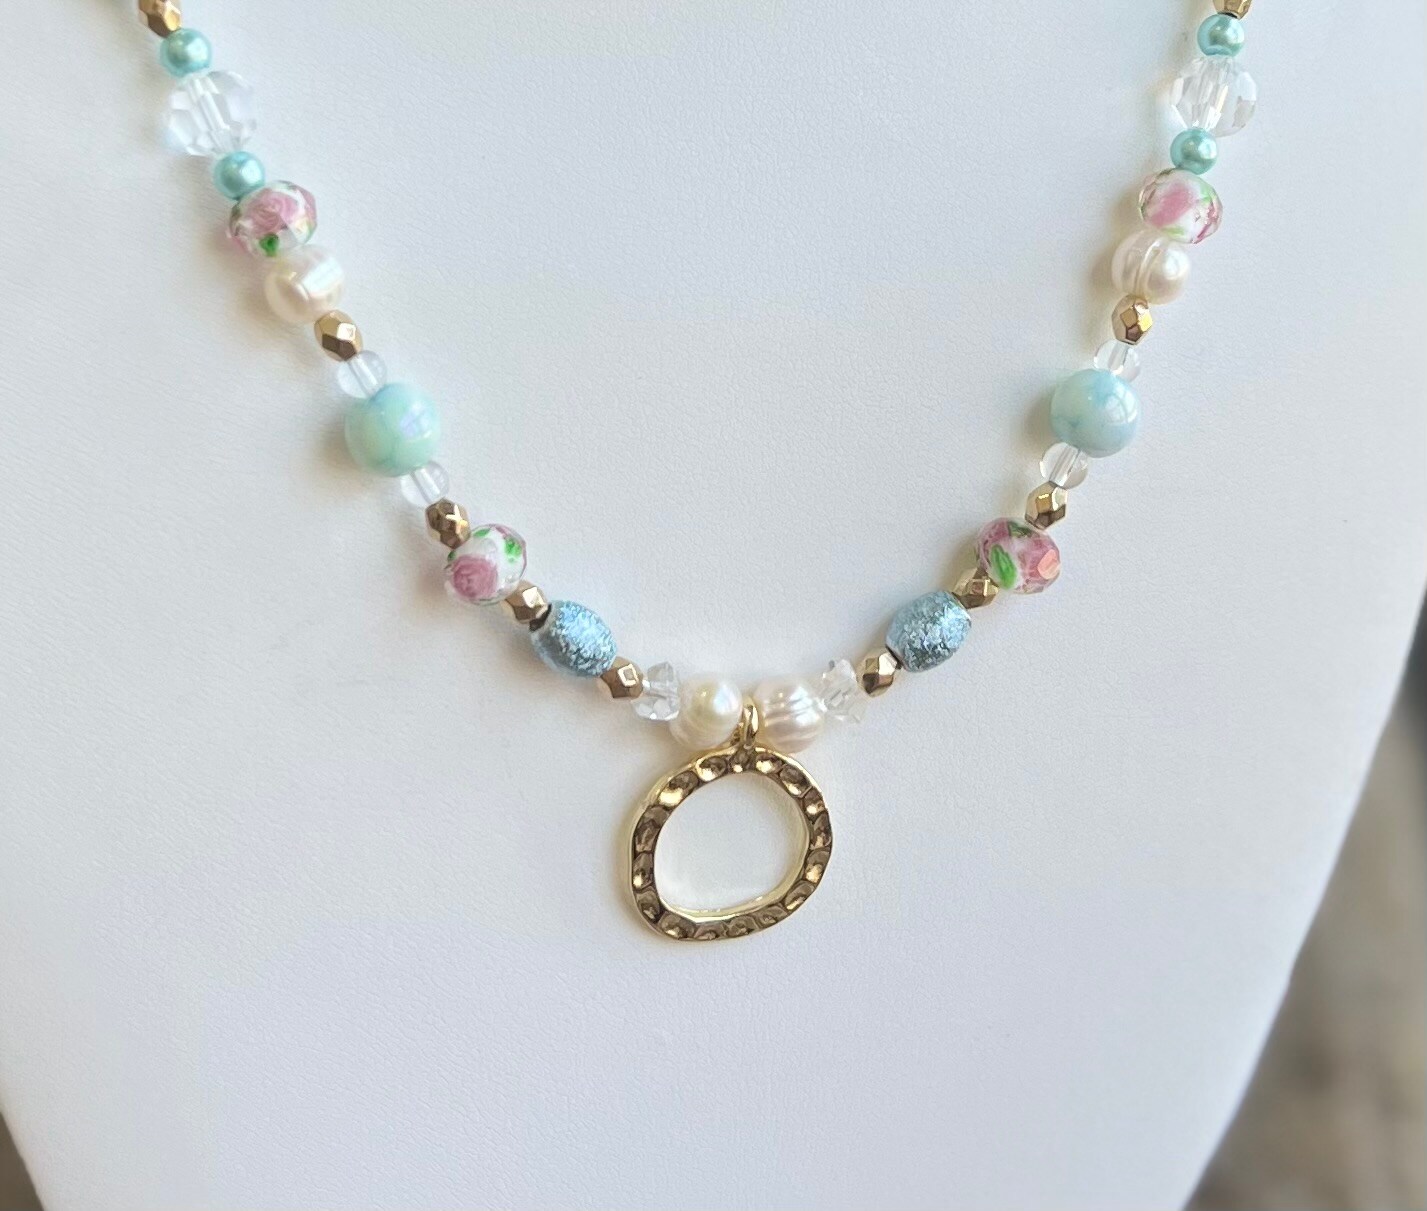 Men's Pearl Necklace with Hand-Painted Glass Beads